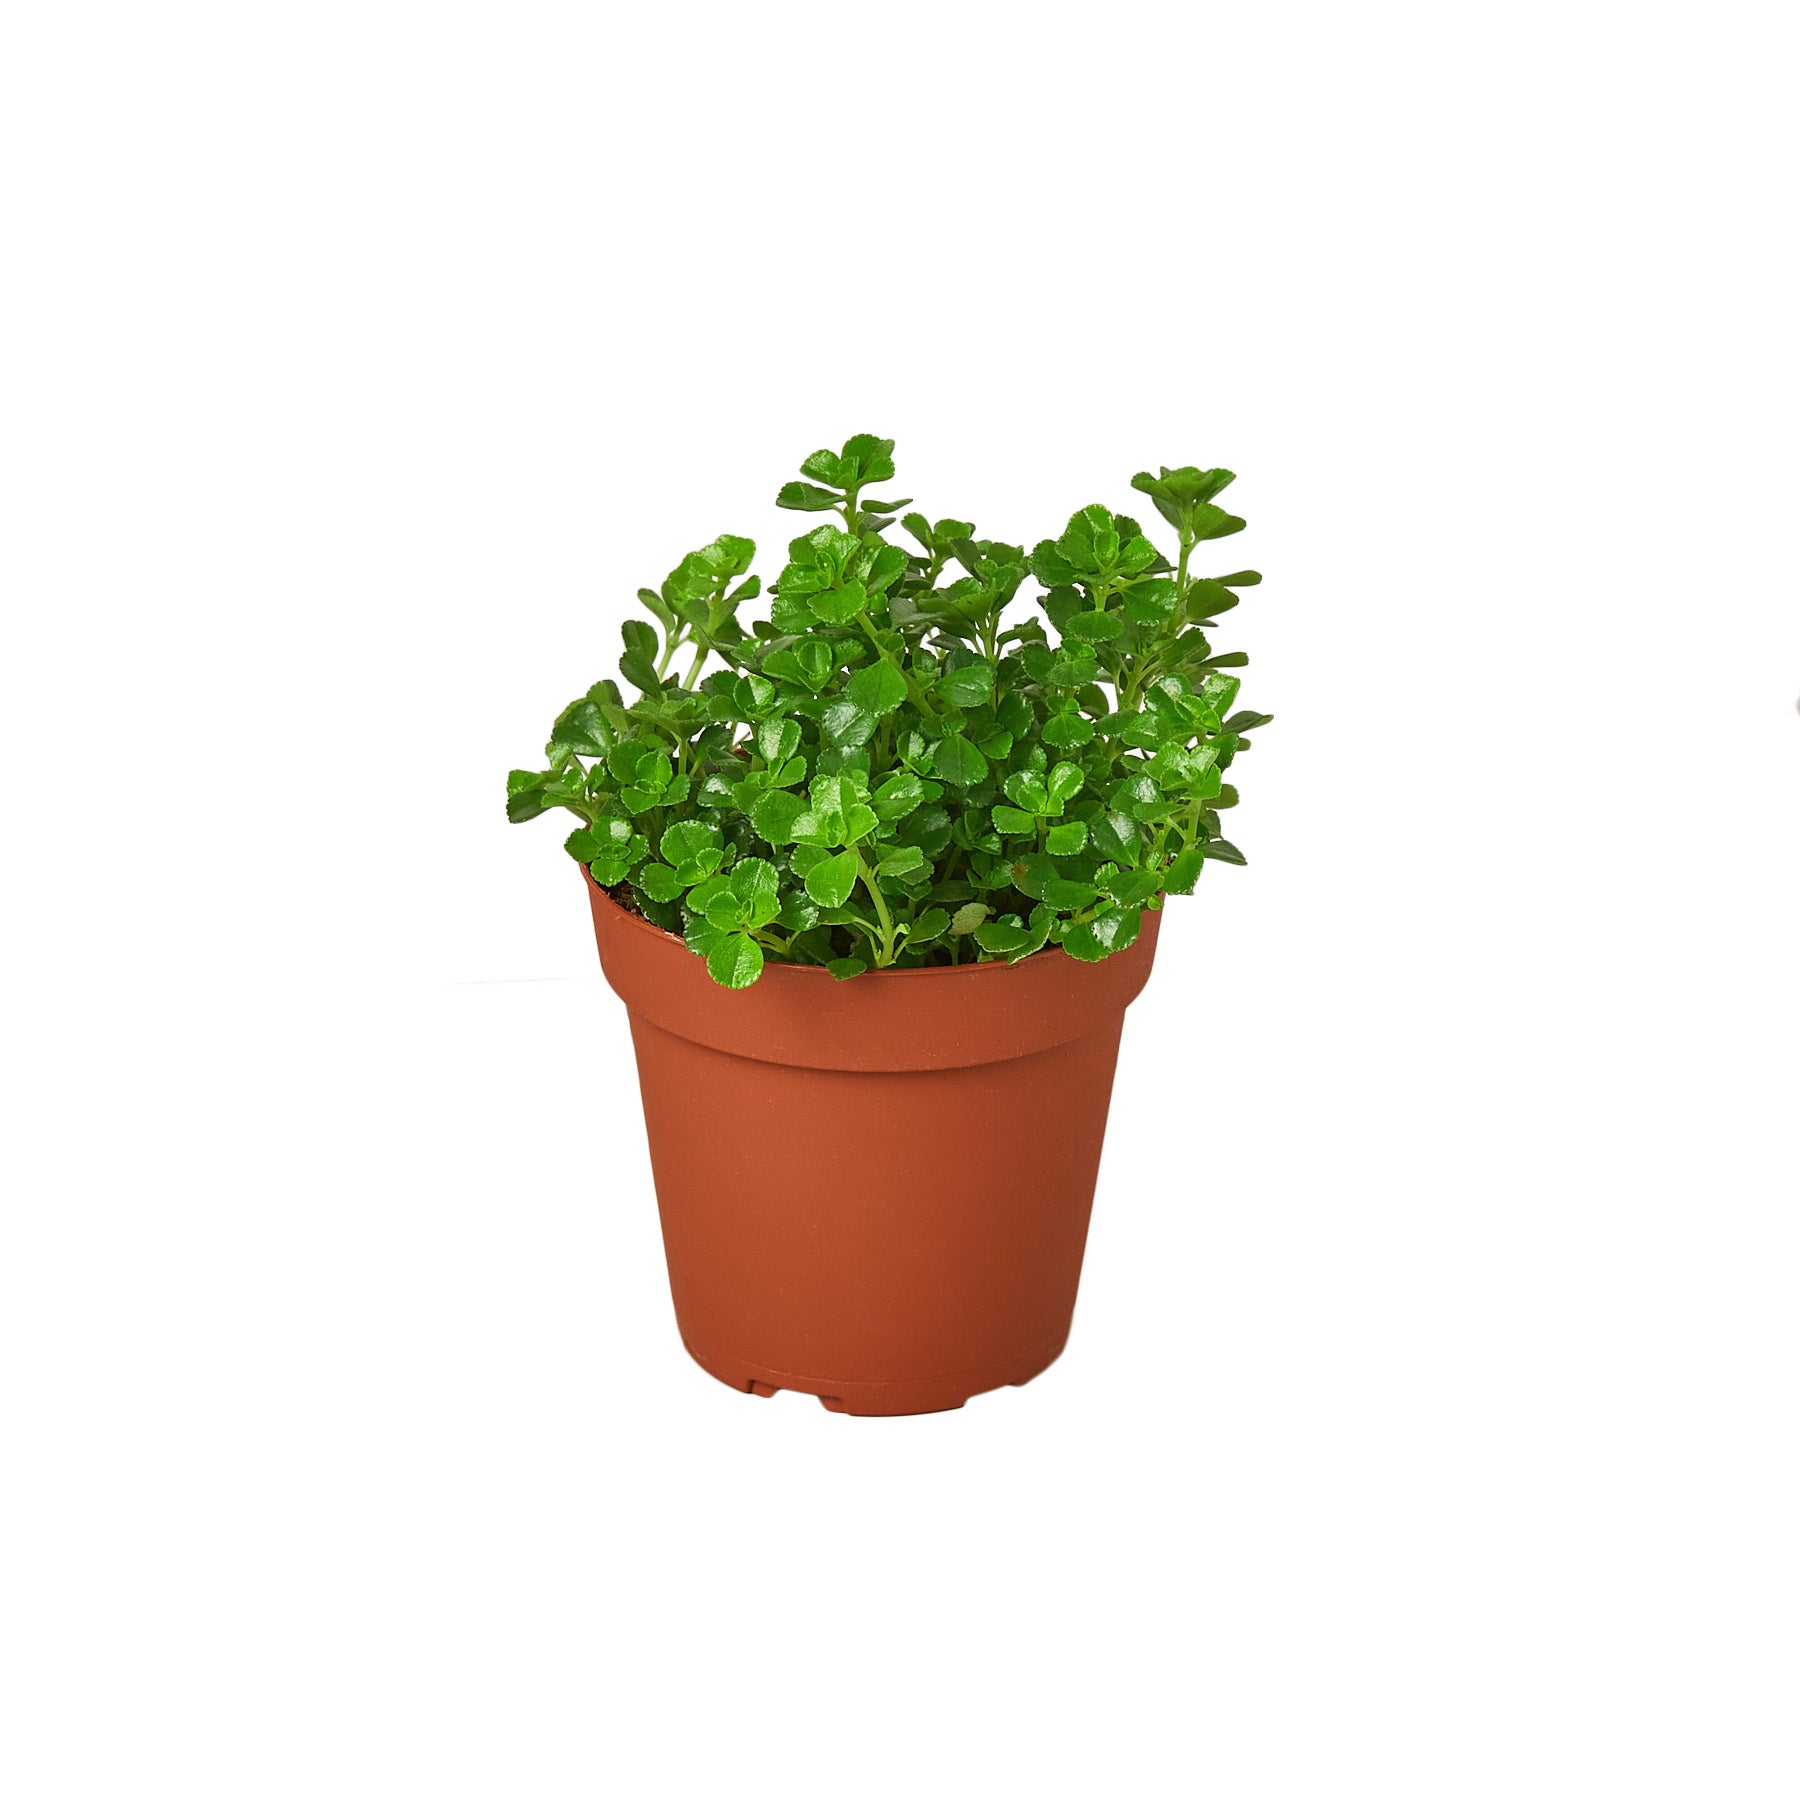 A small plant in a pot on a white background from the best nursery near me.